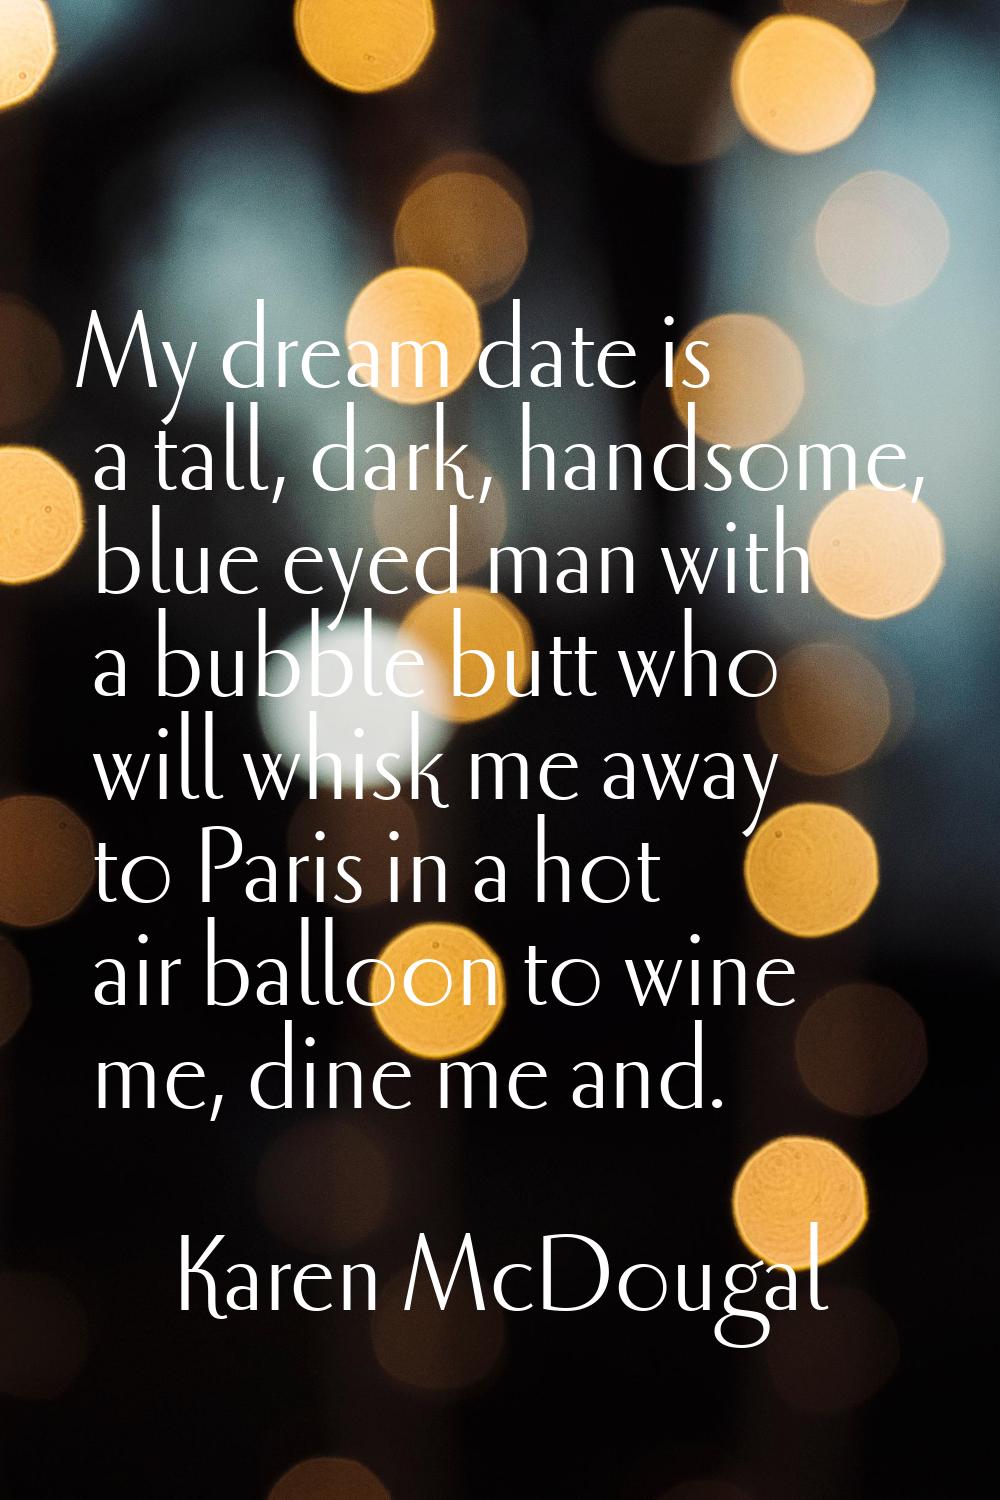 My dream date is a tall, dark, handsome, blue eyed man with a bubble butt who will whisk me away to